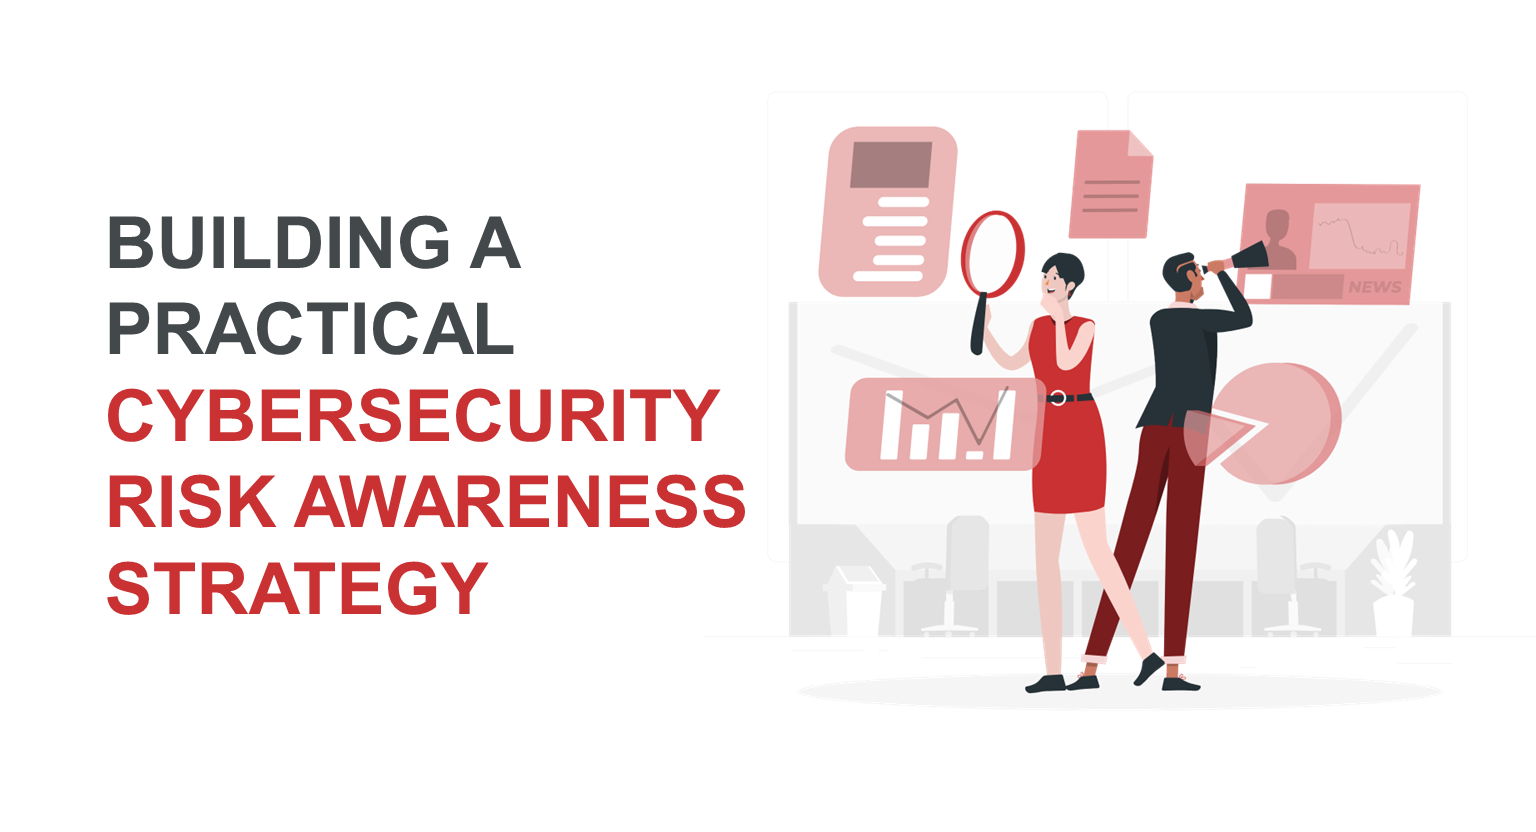 Building a Practical Cybersecurity Risk Awareness Strategy